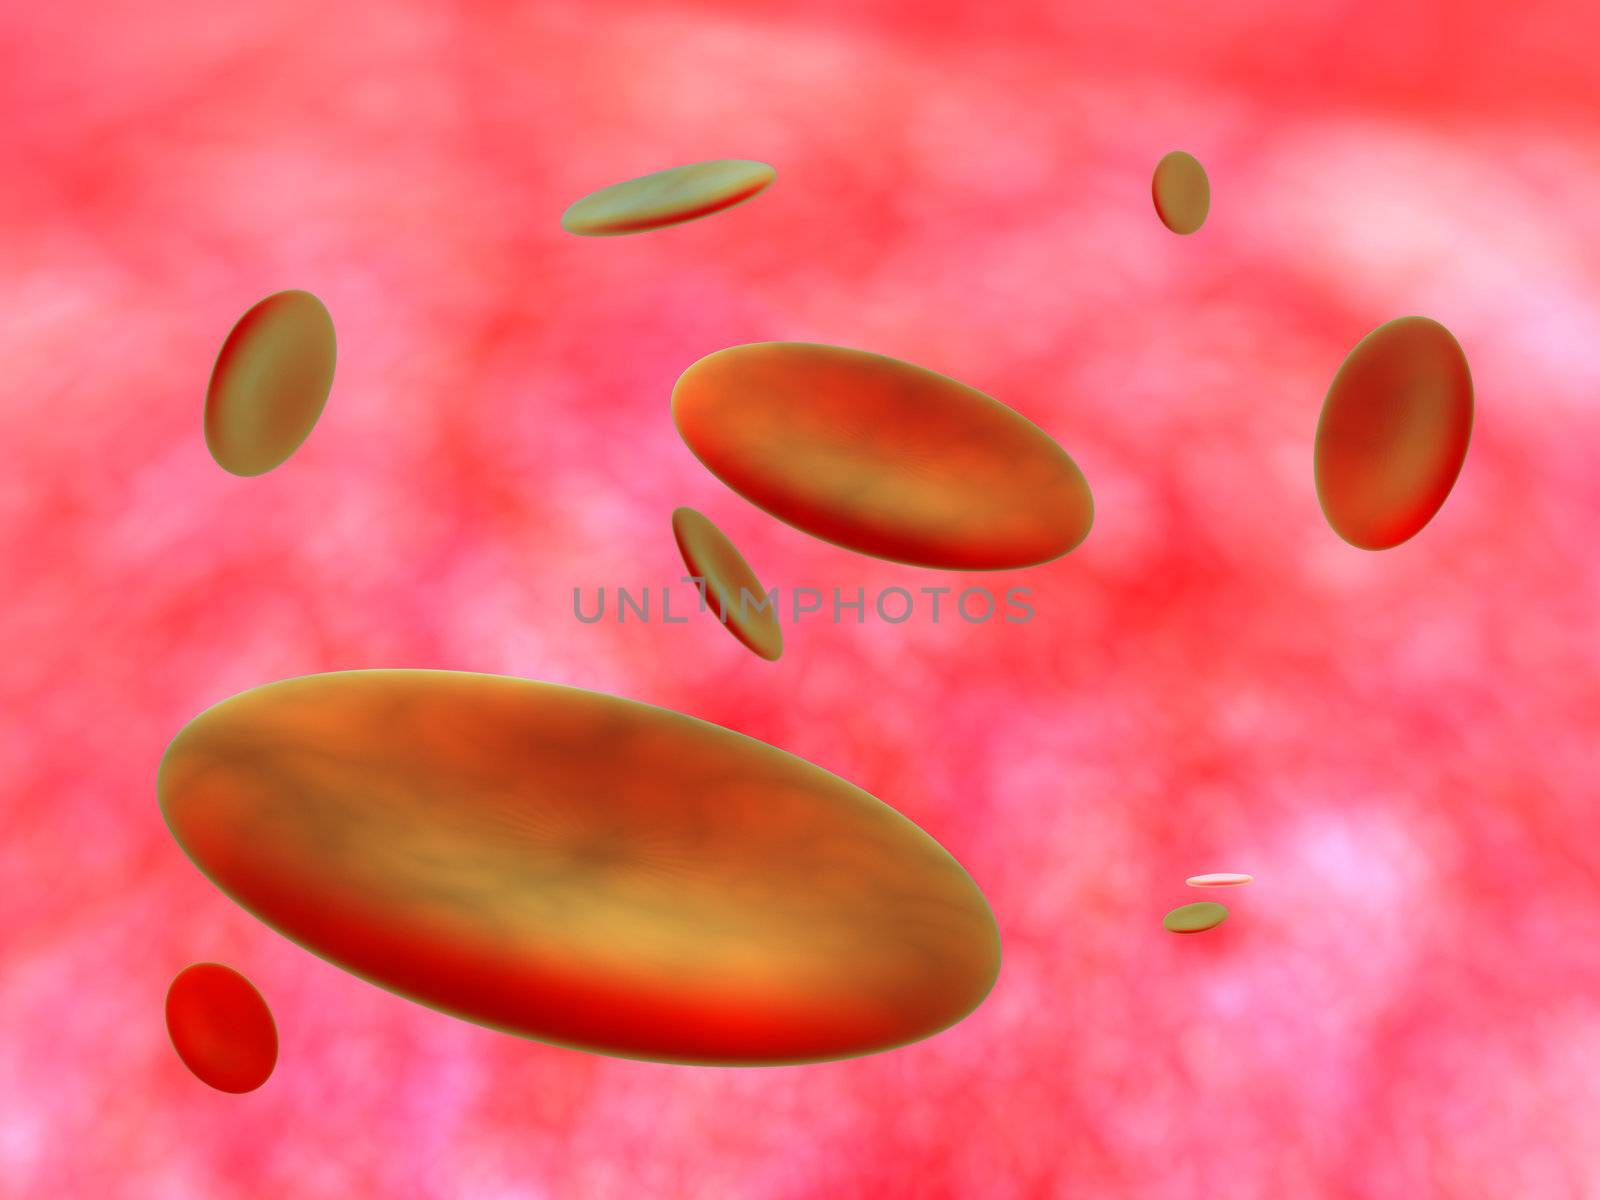 Bloodstream with Hemoblogin Cells. Natural rough surface. 3D rendered Illustration.